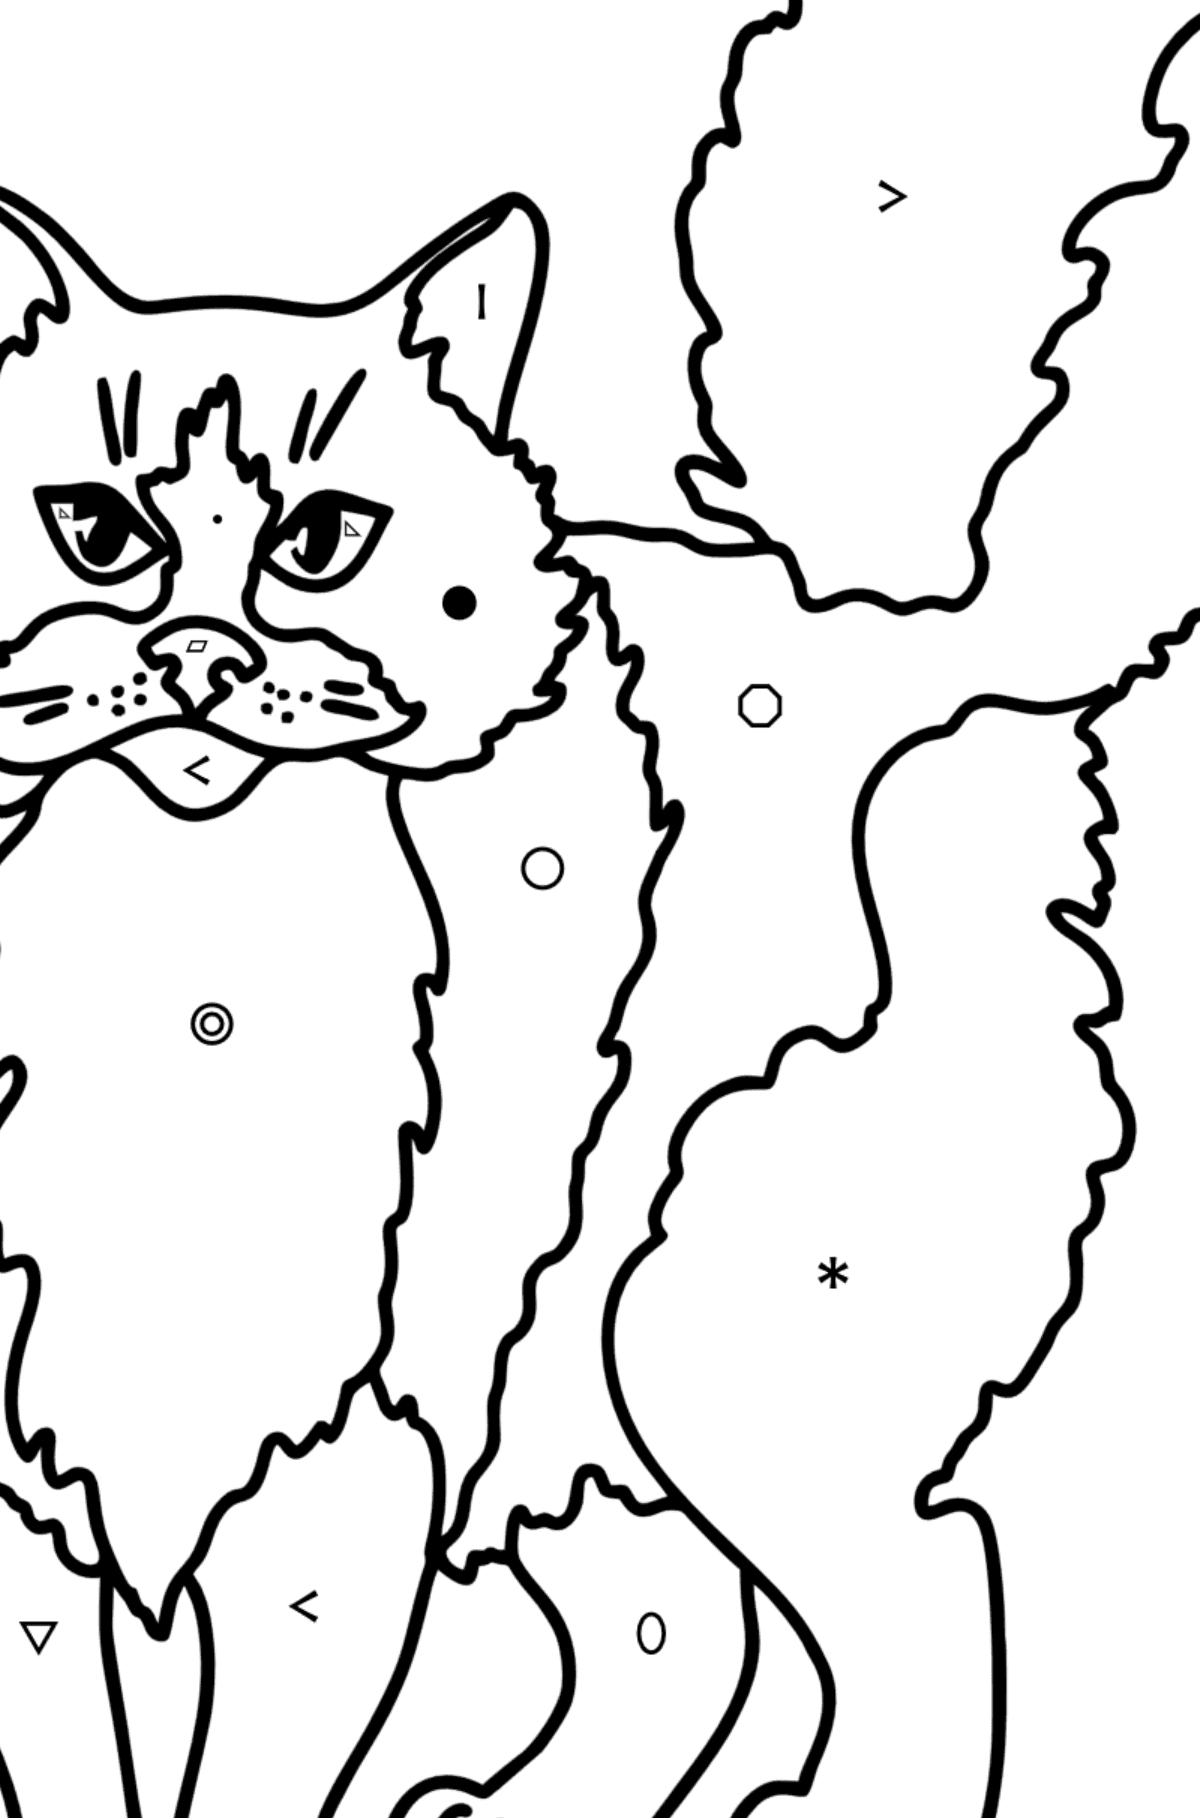 Ragdoll Cat coloring page - Coloring by Symbols and Geometric Shapes for Kids